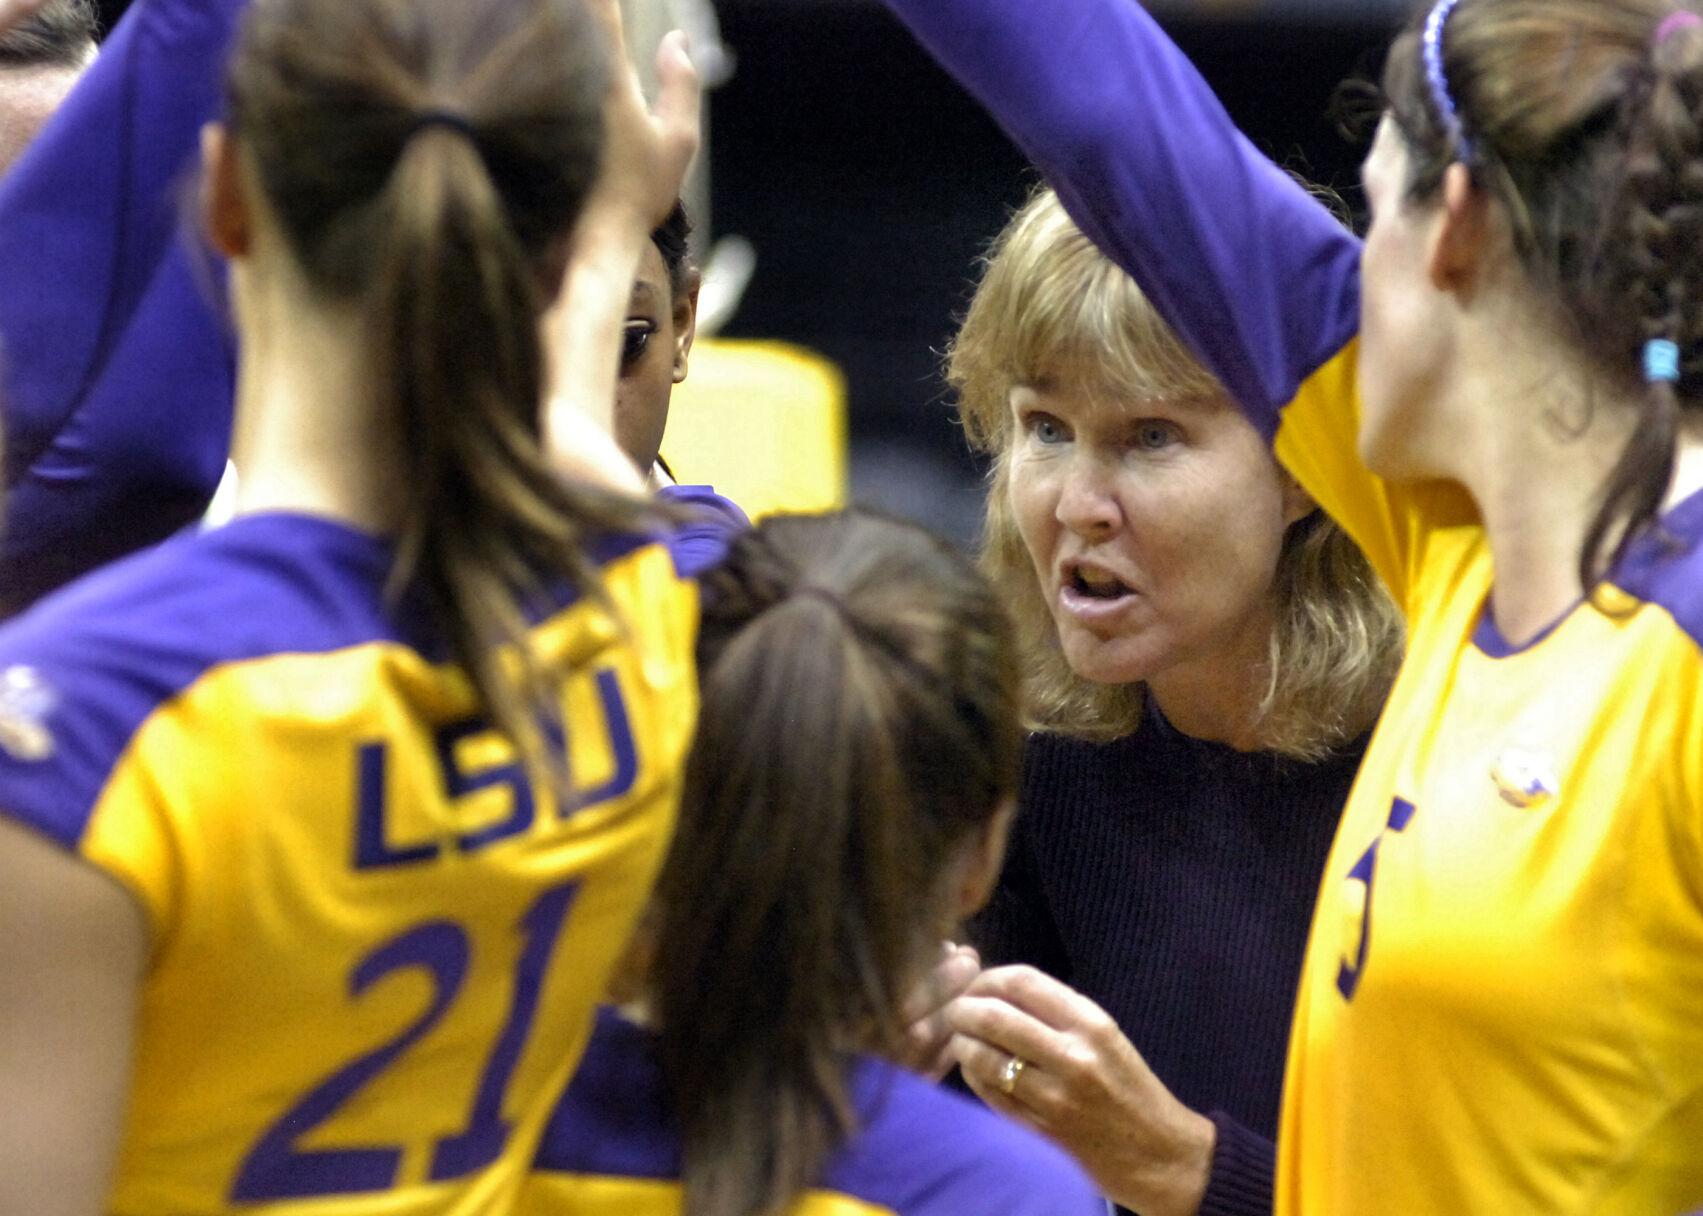 Longtime LSU volleyball coach Fran Flory retires after 24 years 'It